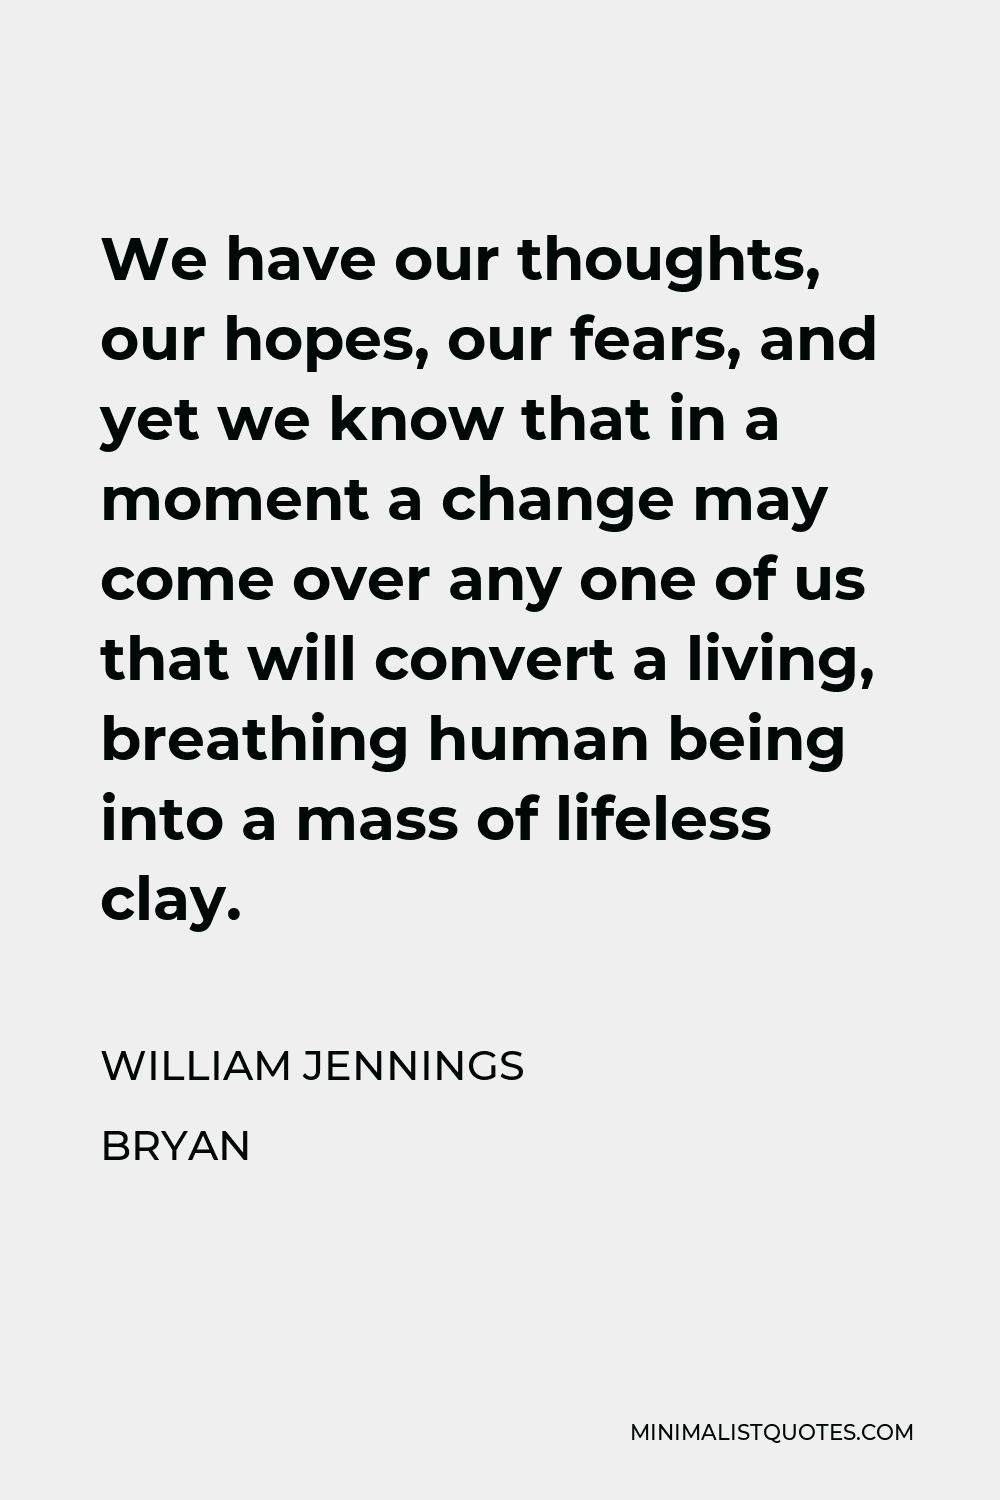 William Jennings Bryan Quote - We have our thoughts, our hopes, our fears, and yet we know that in a moment a change may come over any one of us that will convert a living, breathing human being into a mass of lifeless clay.